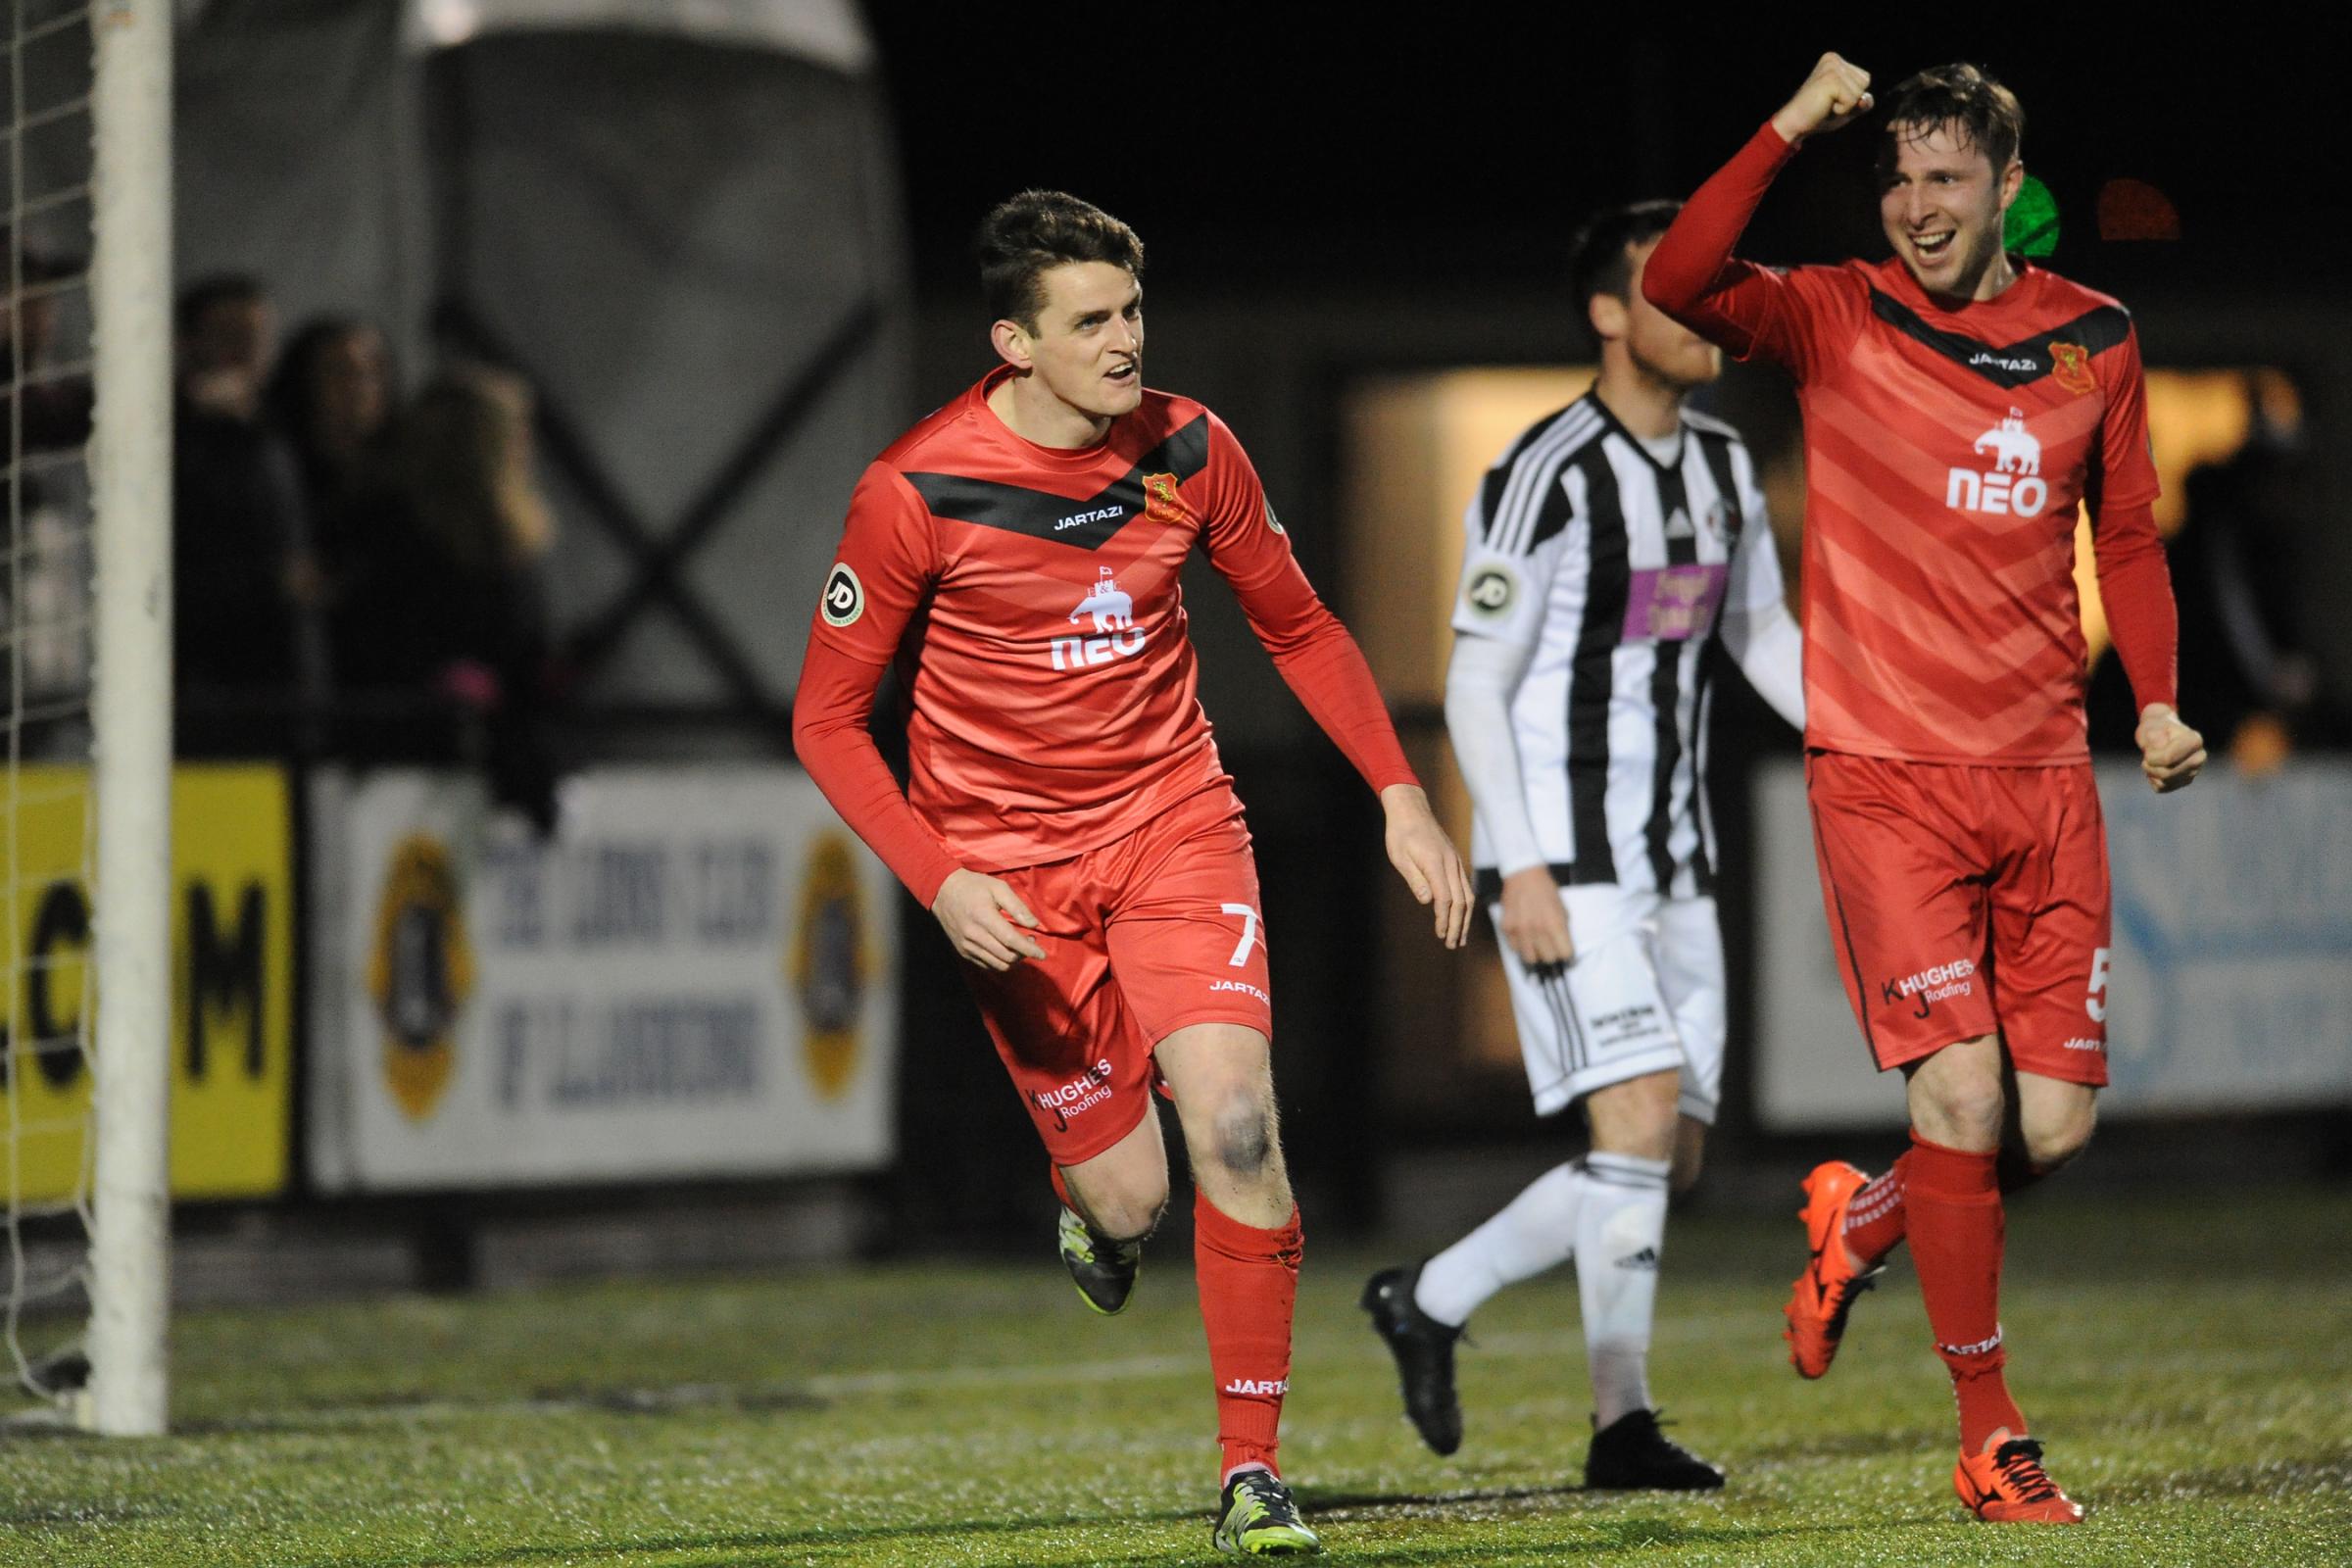 6/3/2018 - GOAL. Neil Mitchell of Newtown celebrates with Kieran Mills Evans after he scores to make it 1-0 during the JD Welsh Cup fixture between Llandudno and Newtown at Giant Hospitality Stadium, Maesdu Park, Llandudno...Pic: Mike Sheridan/County Time